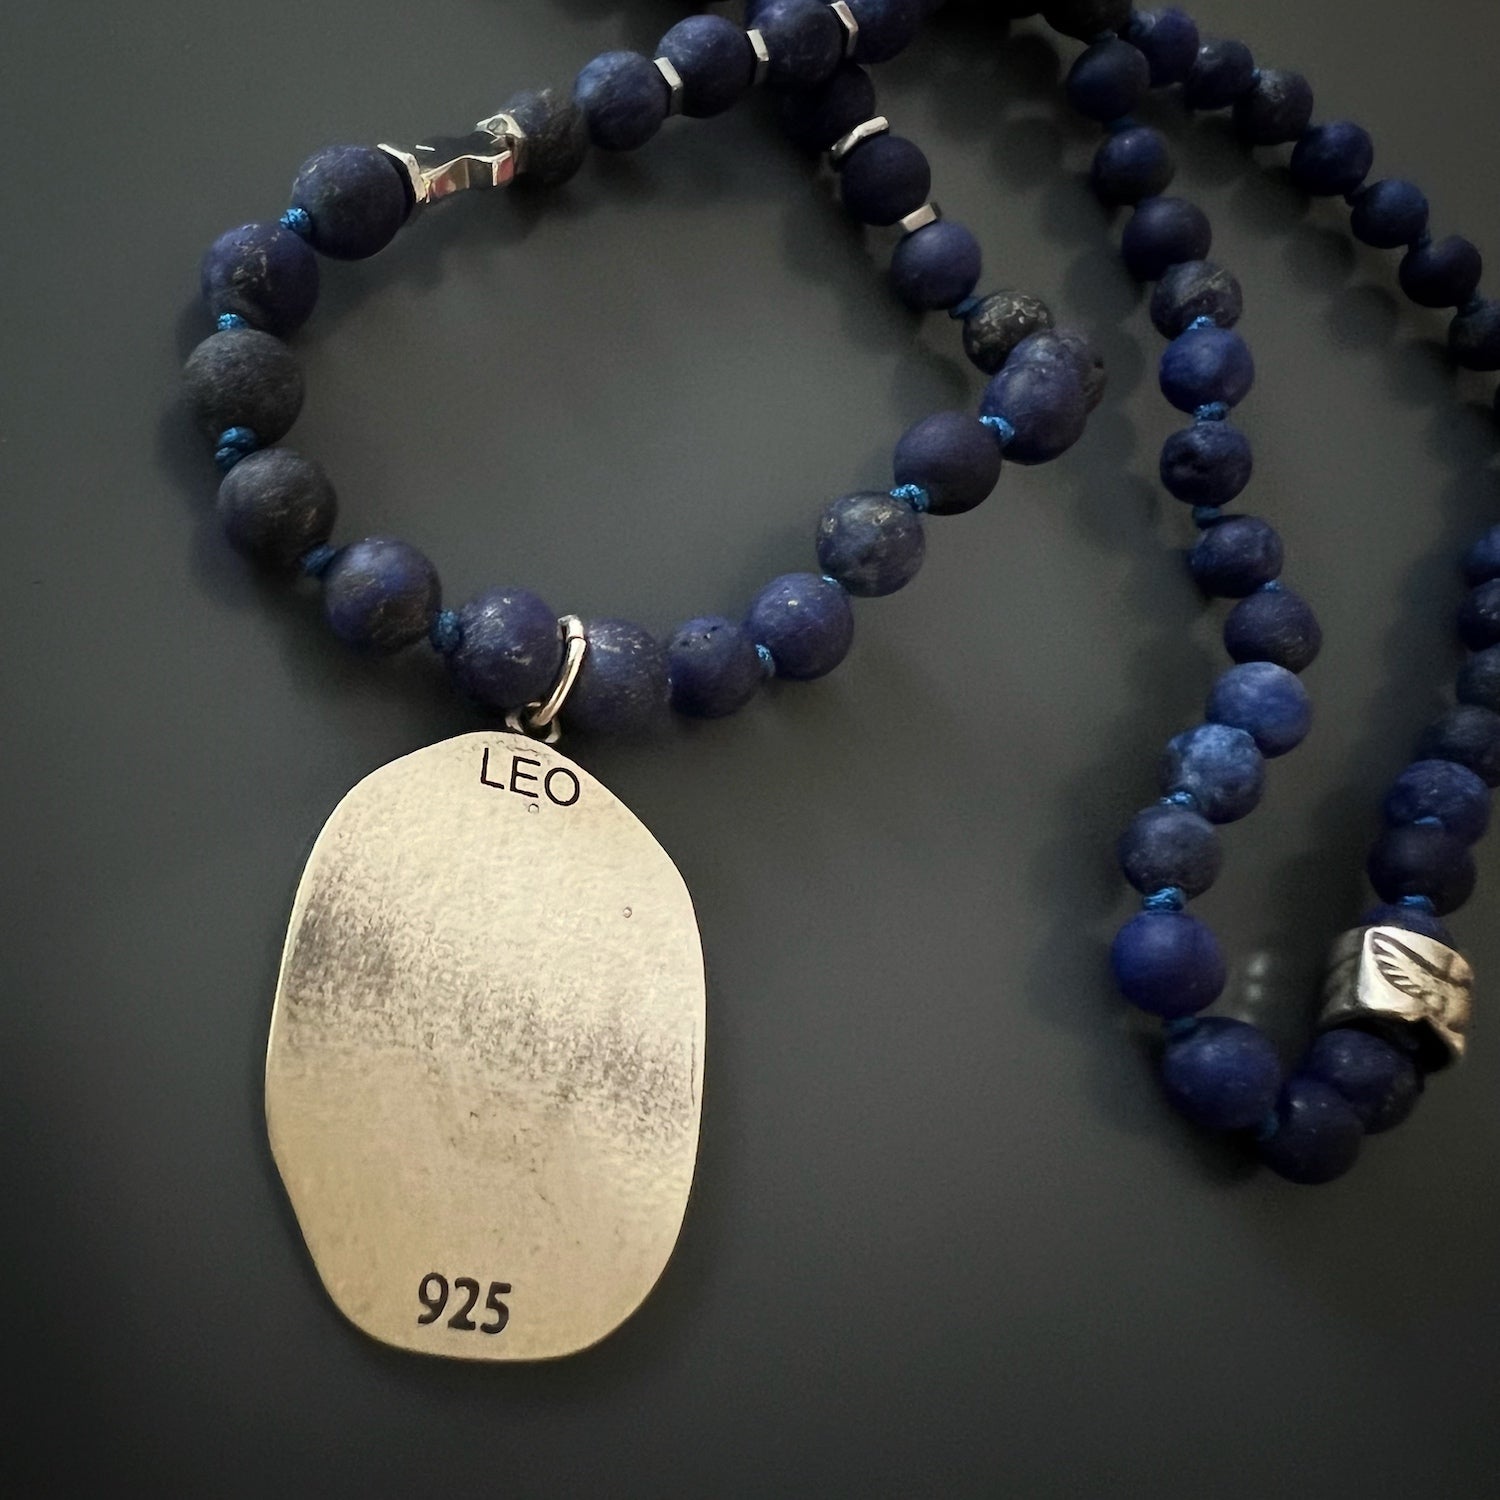 Celebrate your individuality with the Spiritual Lapis Lazuli Lion necklace, handcrafted with sterling silver and lapis lazuli beads.